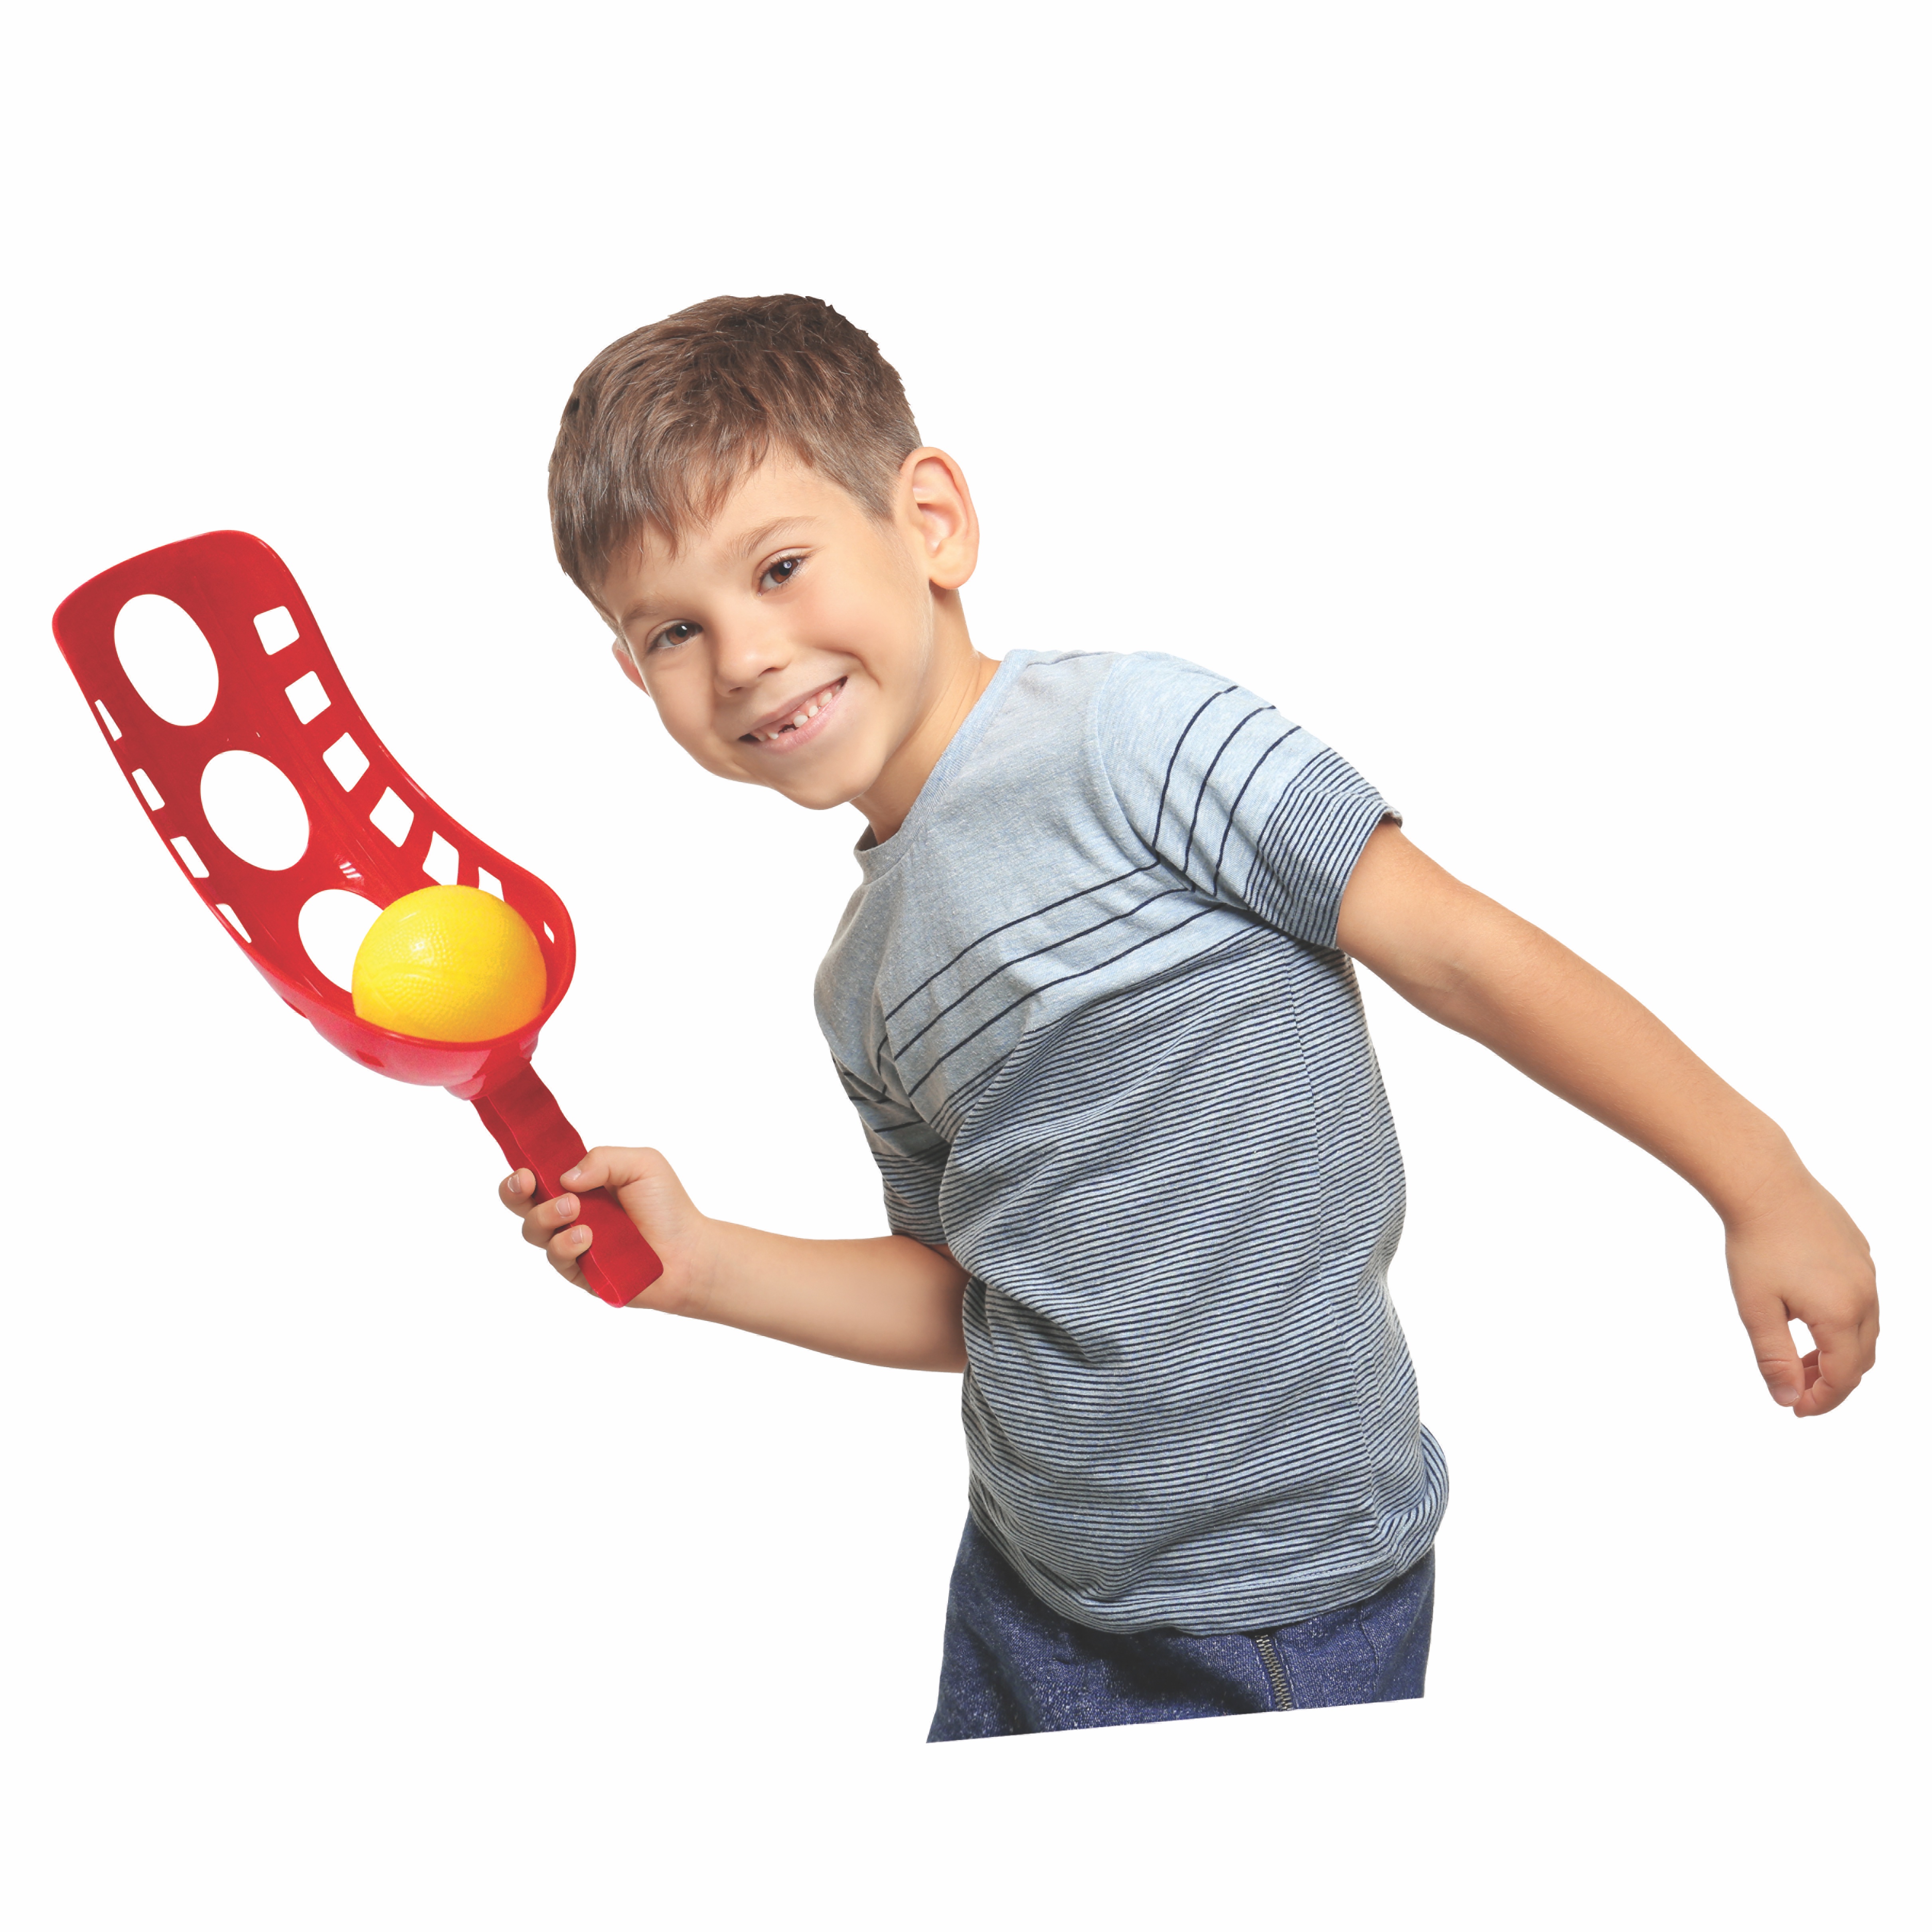 MinnARK 5-in-1 Sports Set, Family Games, Outdoor Yard Games, Beach Games, Jr. Sports - image 5 of 9